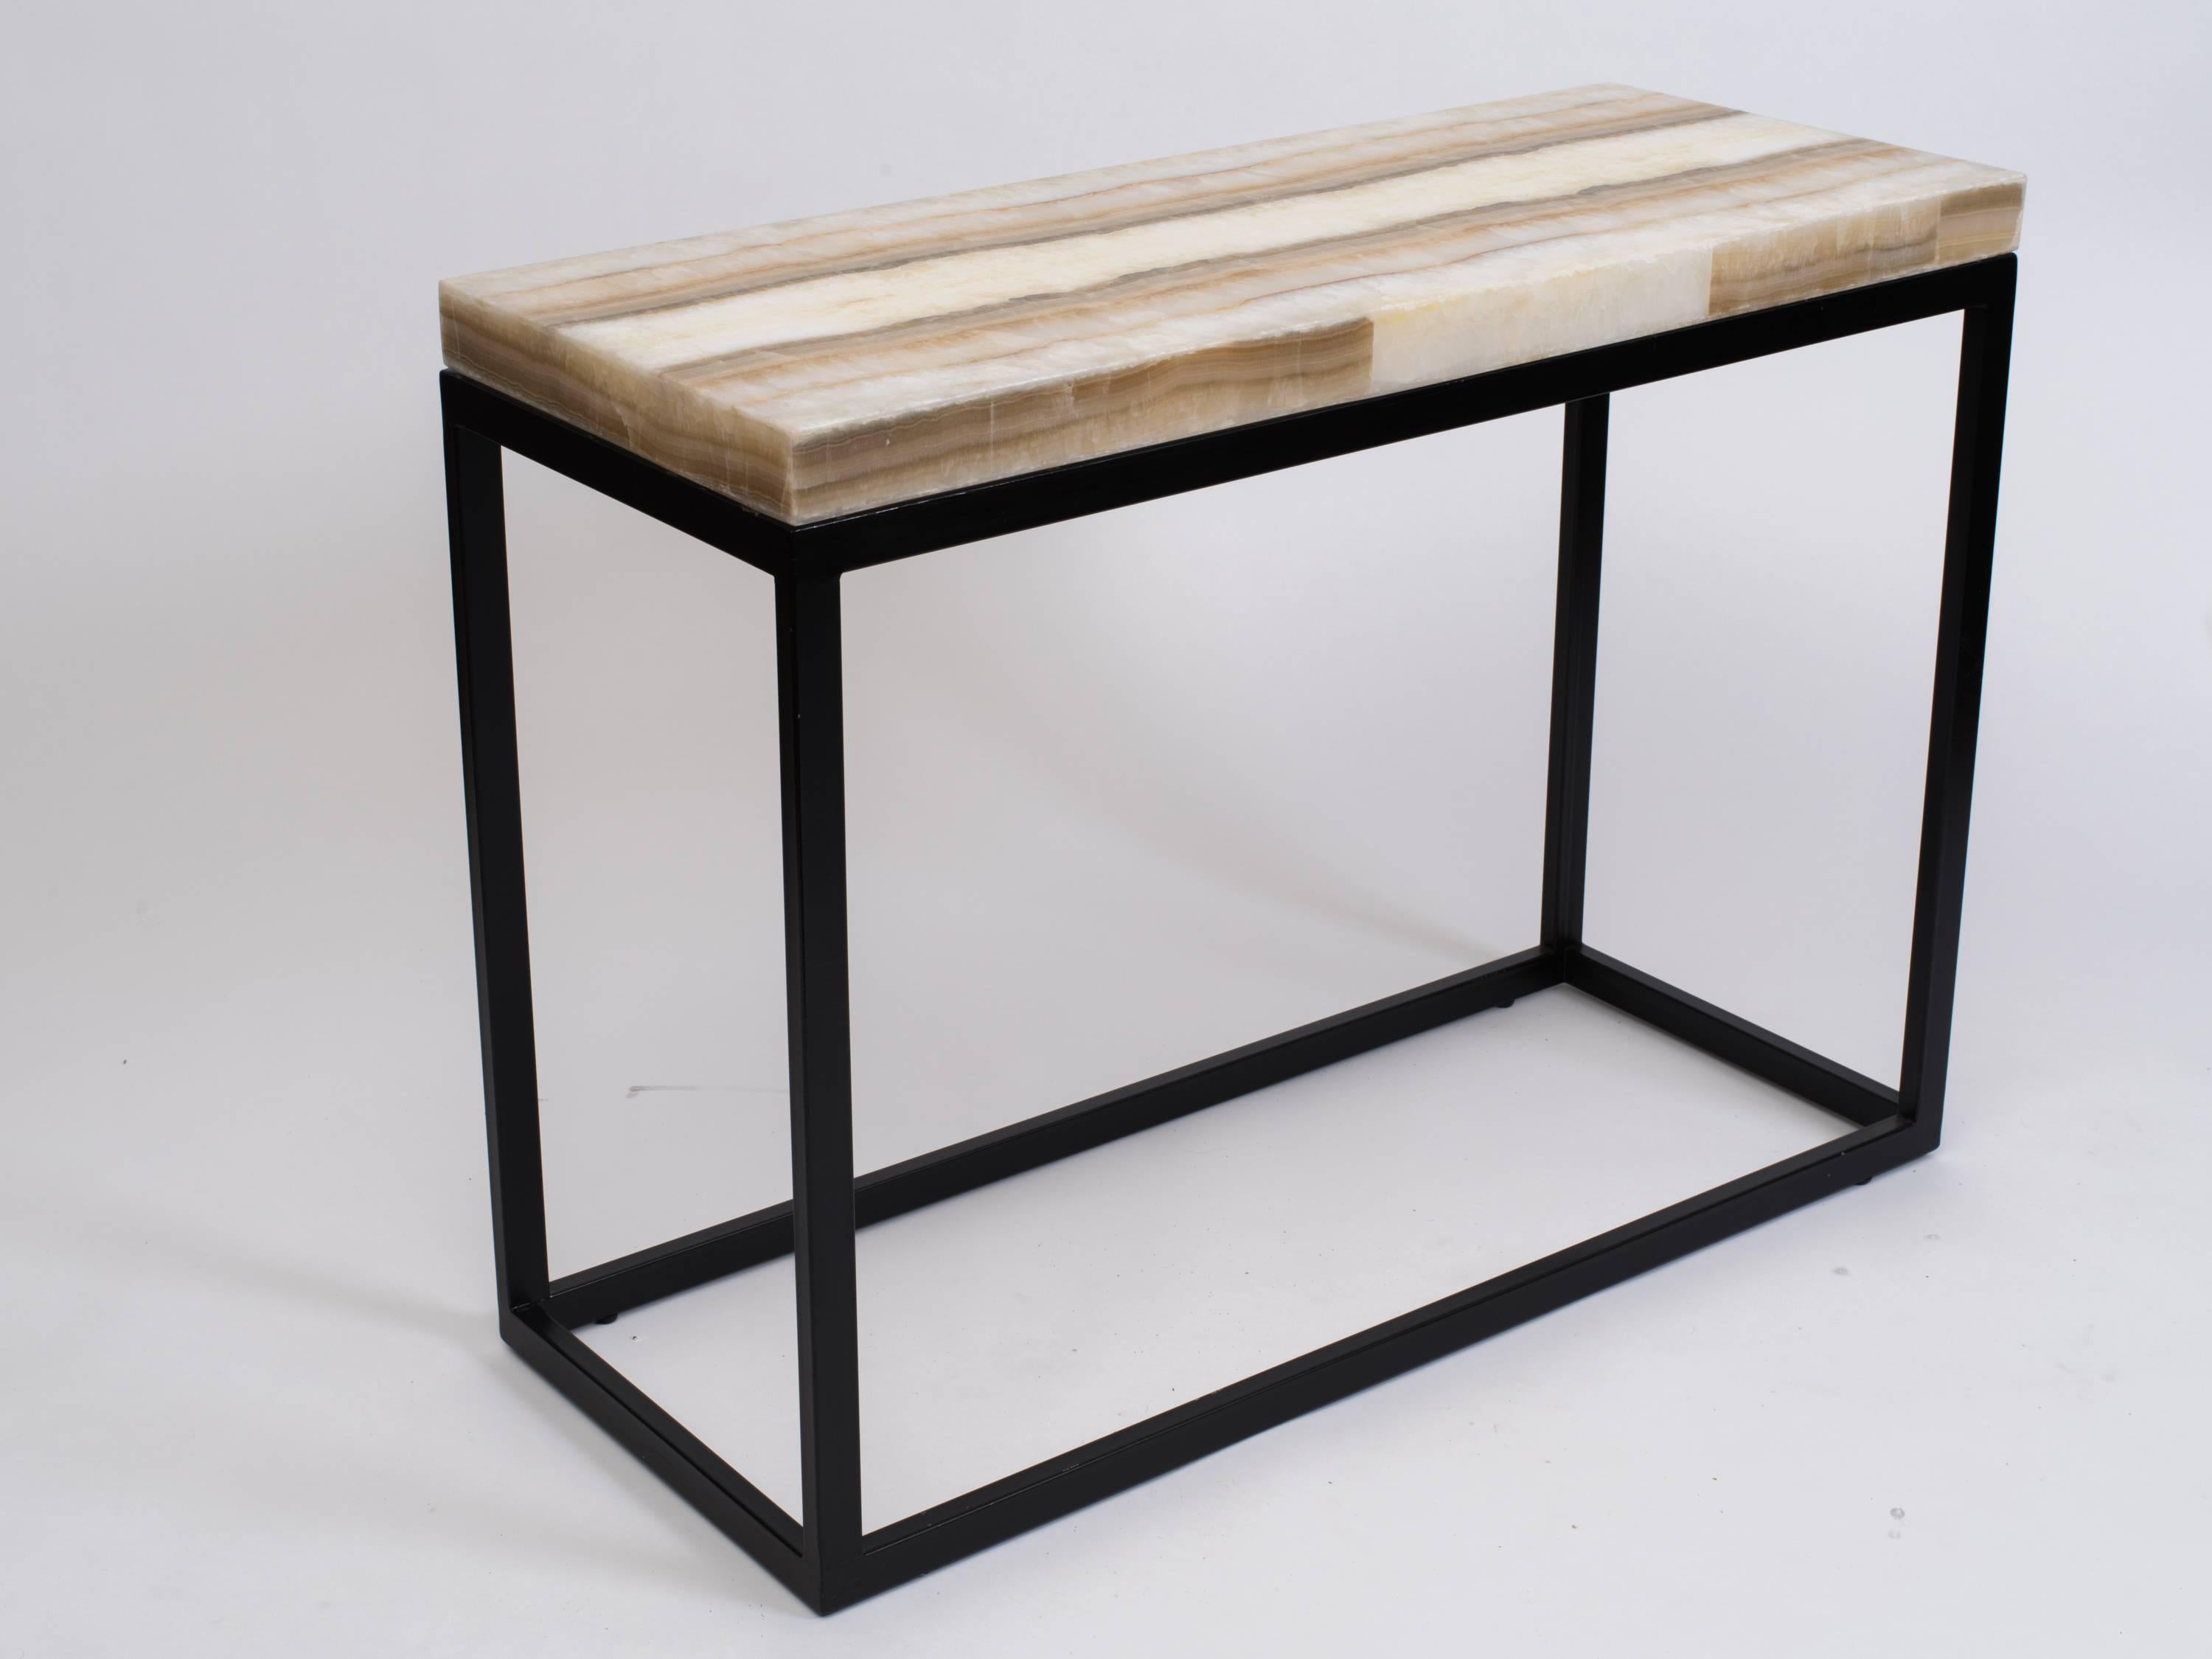 Gorgeous natural ribbon onyx top console table on black finish metal shadowbox frame base. 